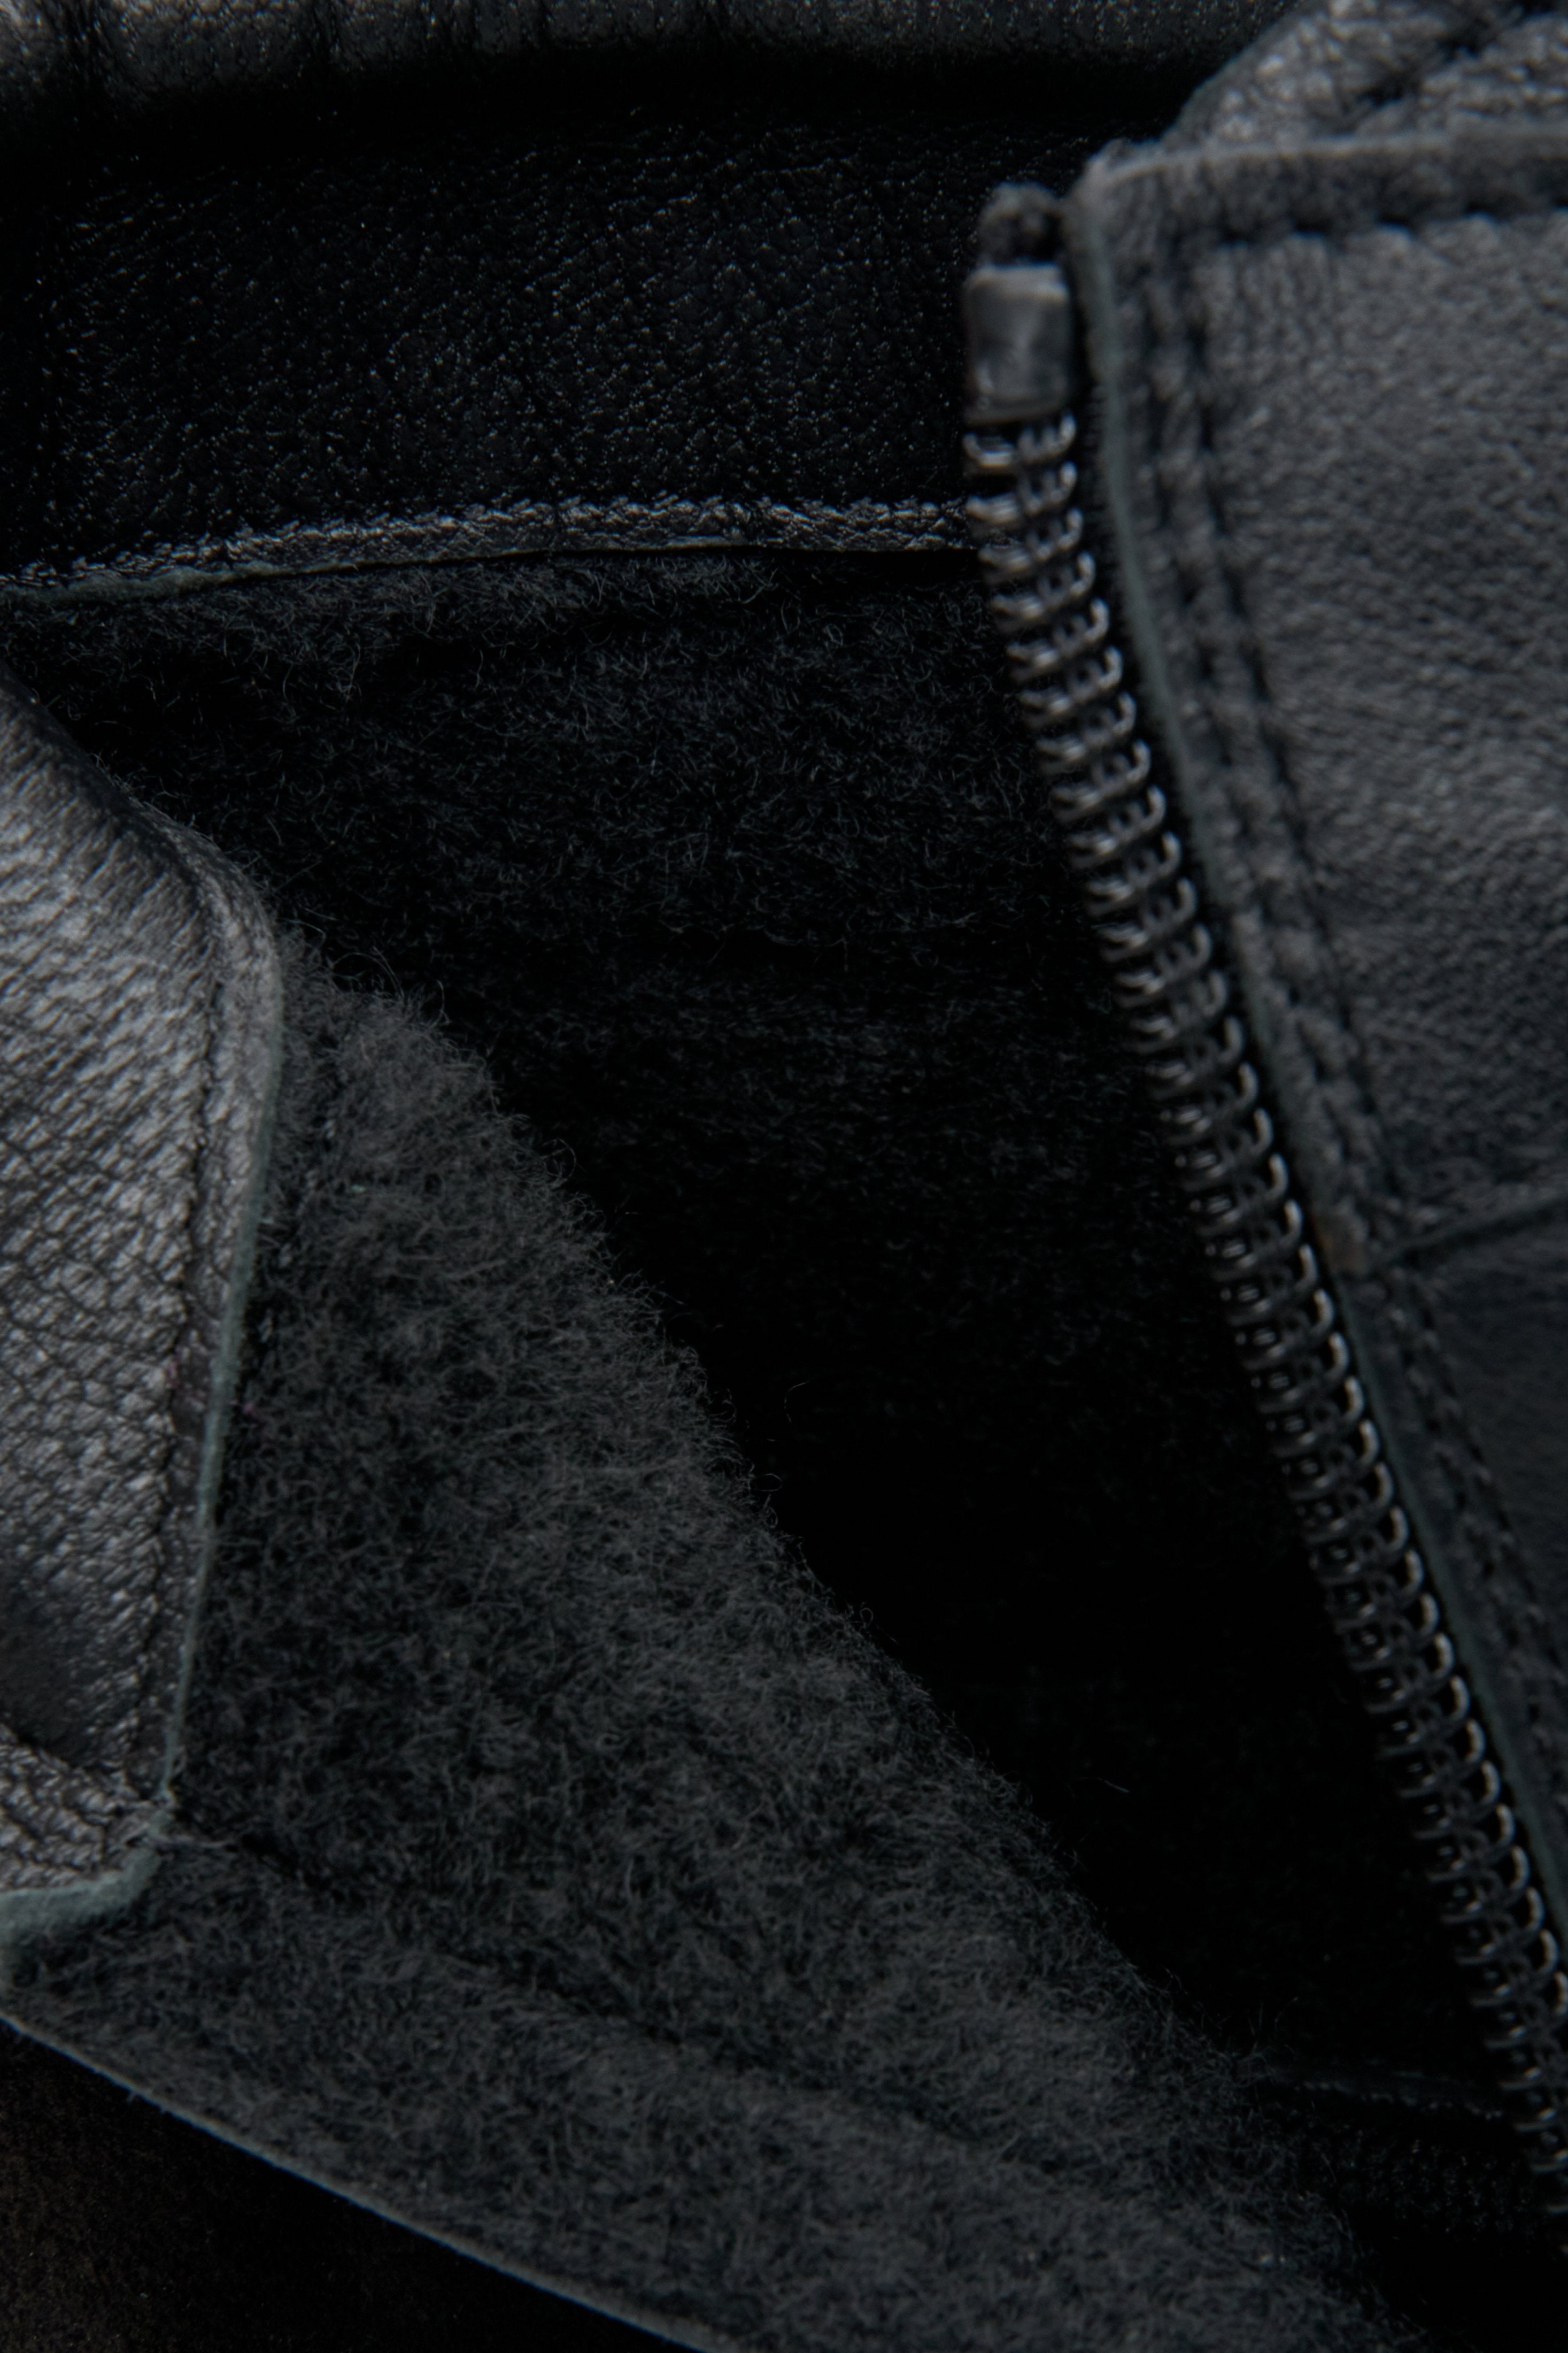 Men's back high-top Estro sneakers - close-up on the inside of the shoe.